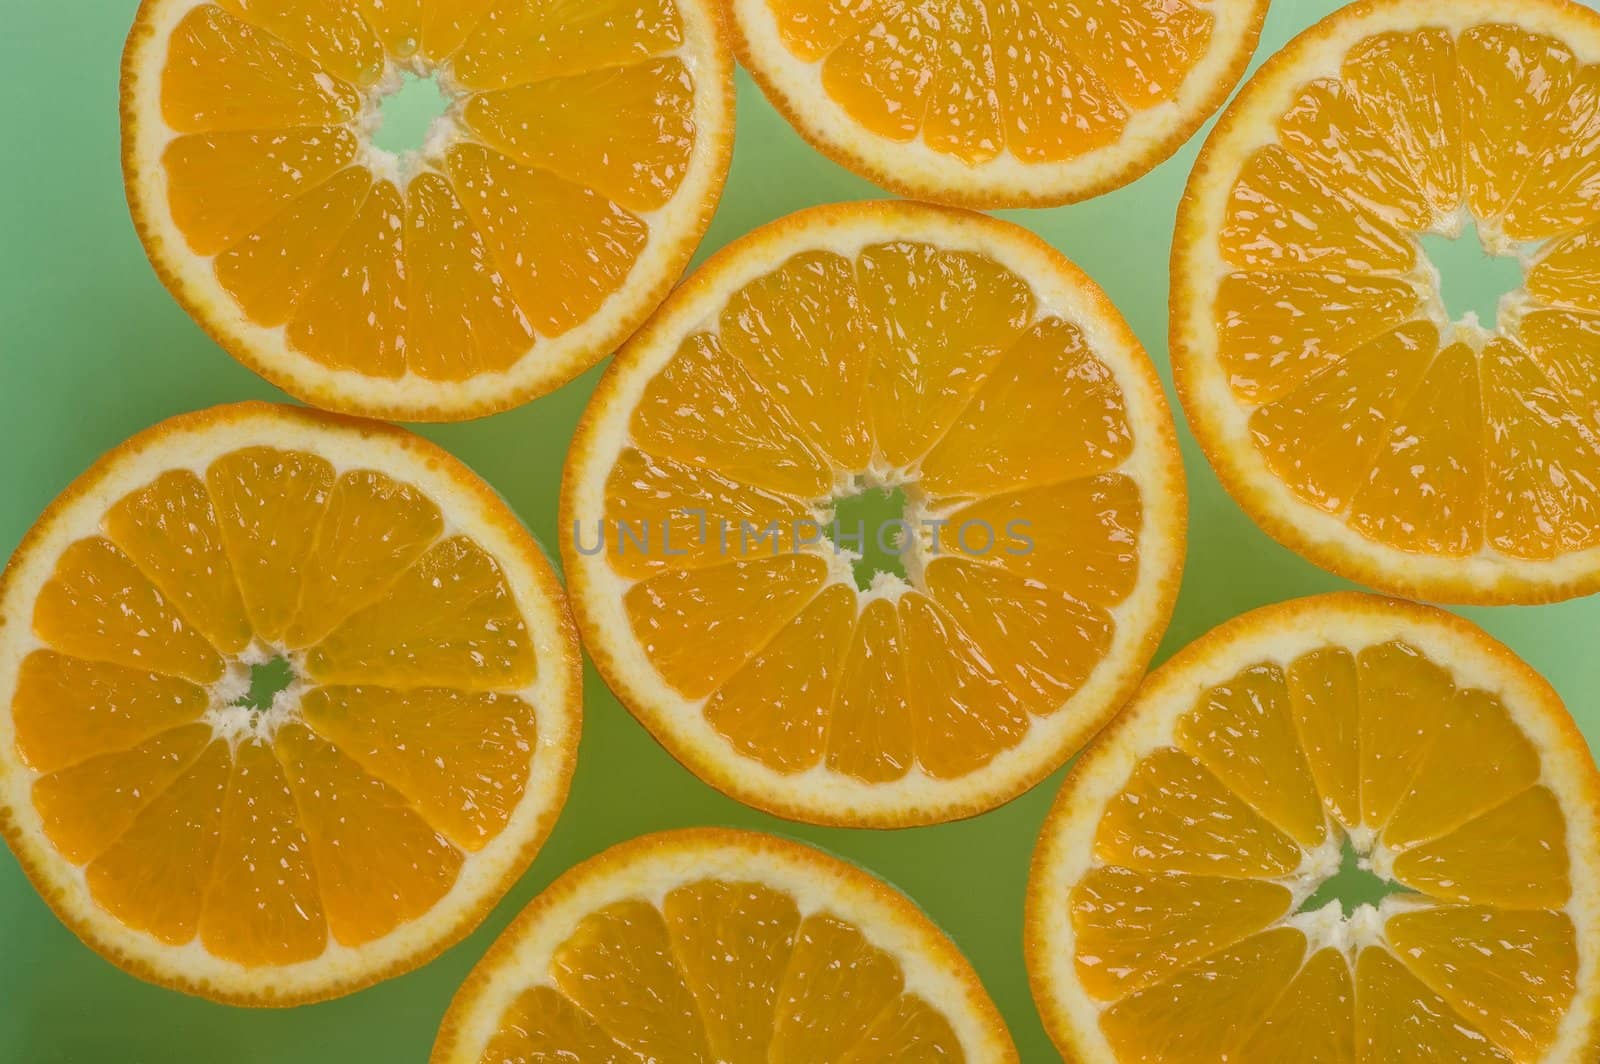 orange slices on the green table